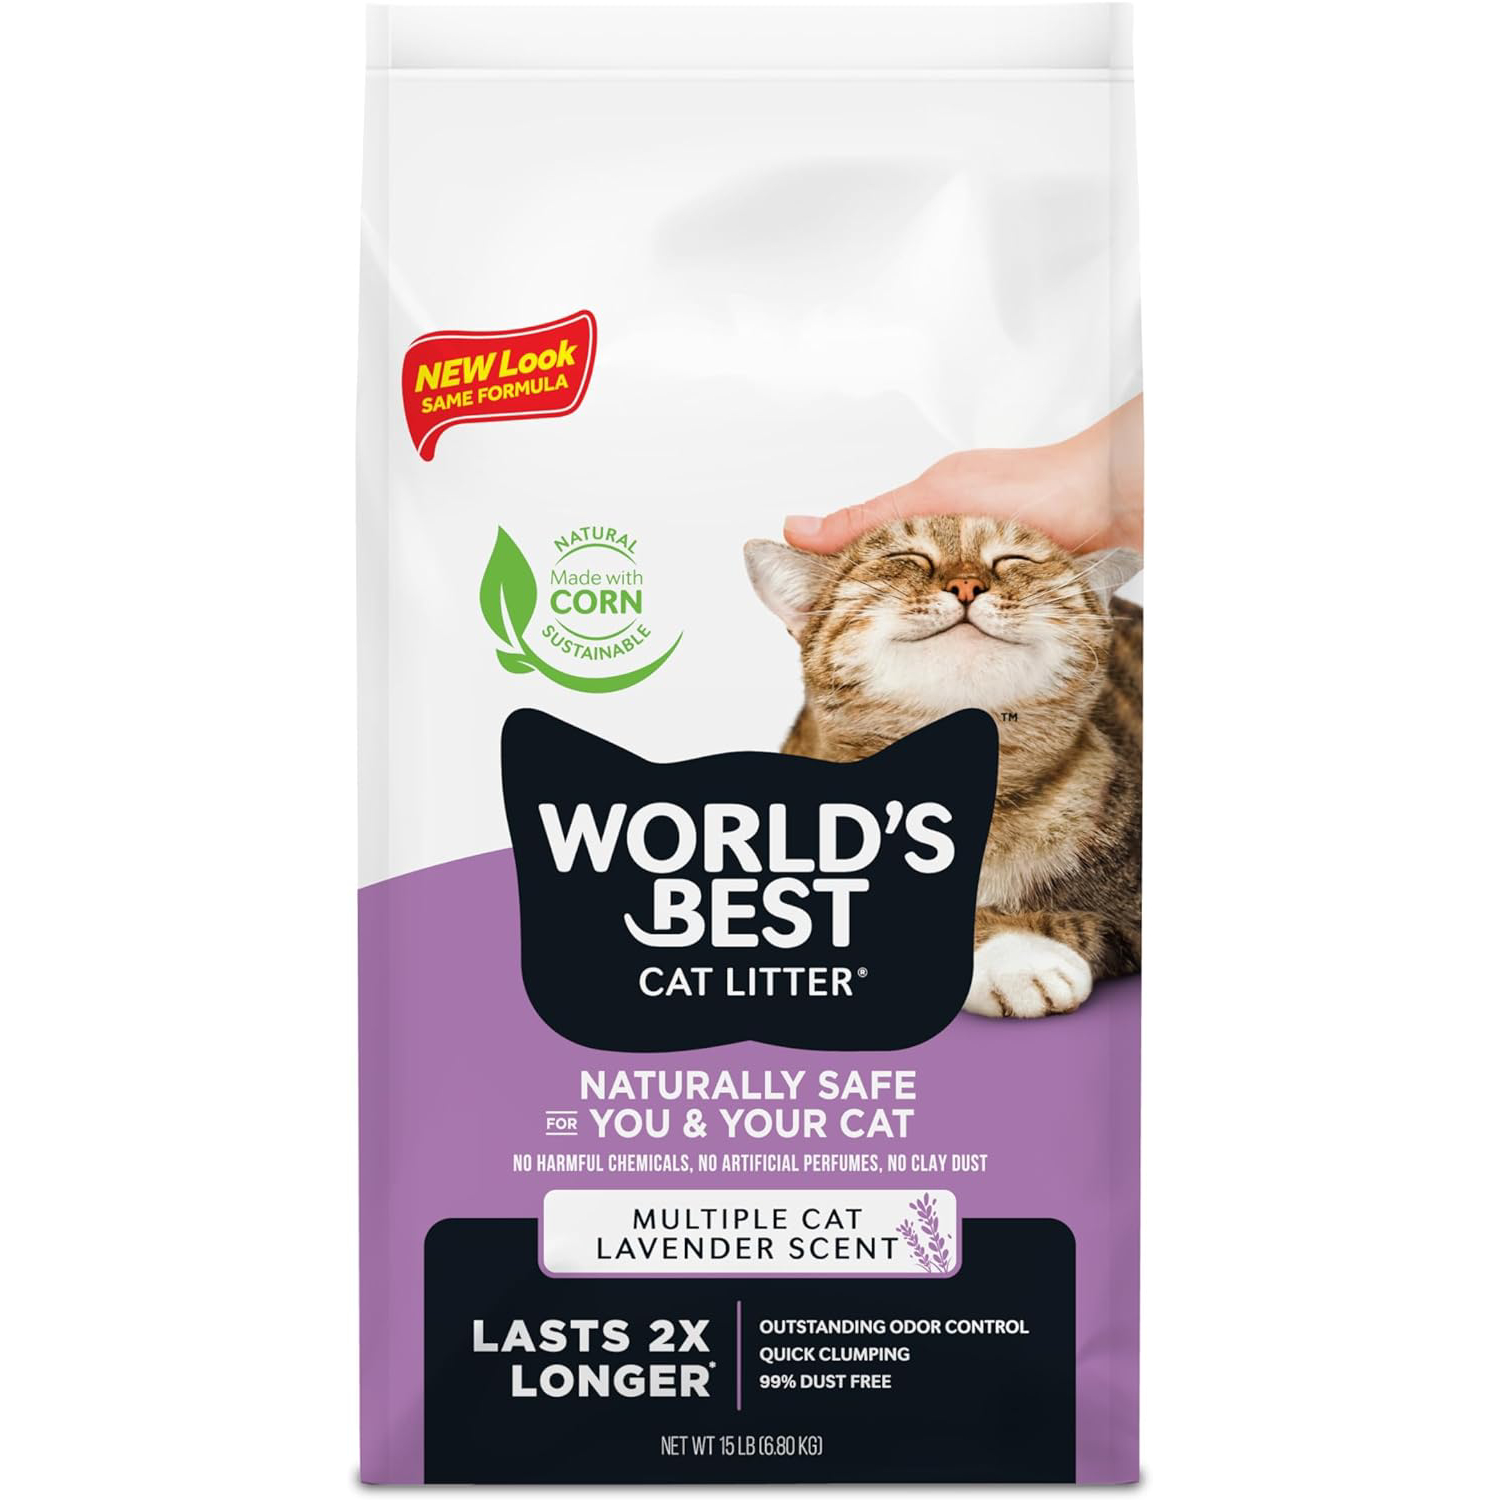 WORLD_S BEST CAT LITTER Multiple Cat Lavender Scented 15-Pounds - Natural Ingredients, Quick Clumping, Flushable, 99_ Dust Free & Made in USA - Calming Fragrance & Long-Lasting Odor Control new